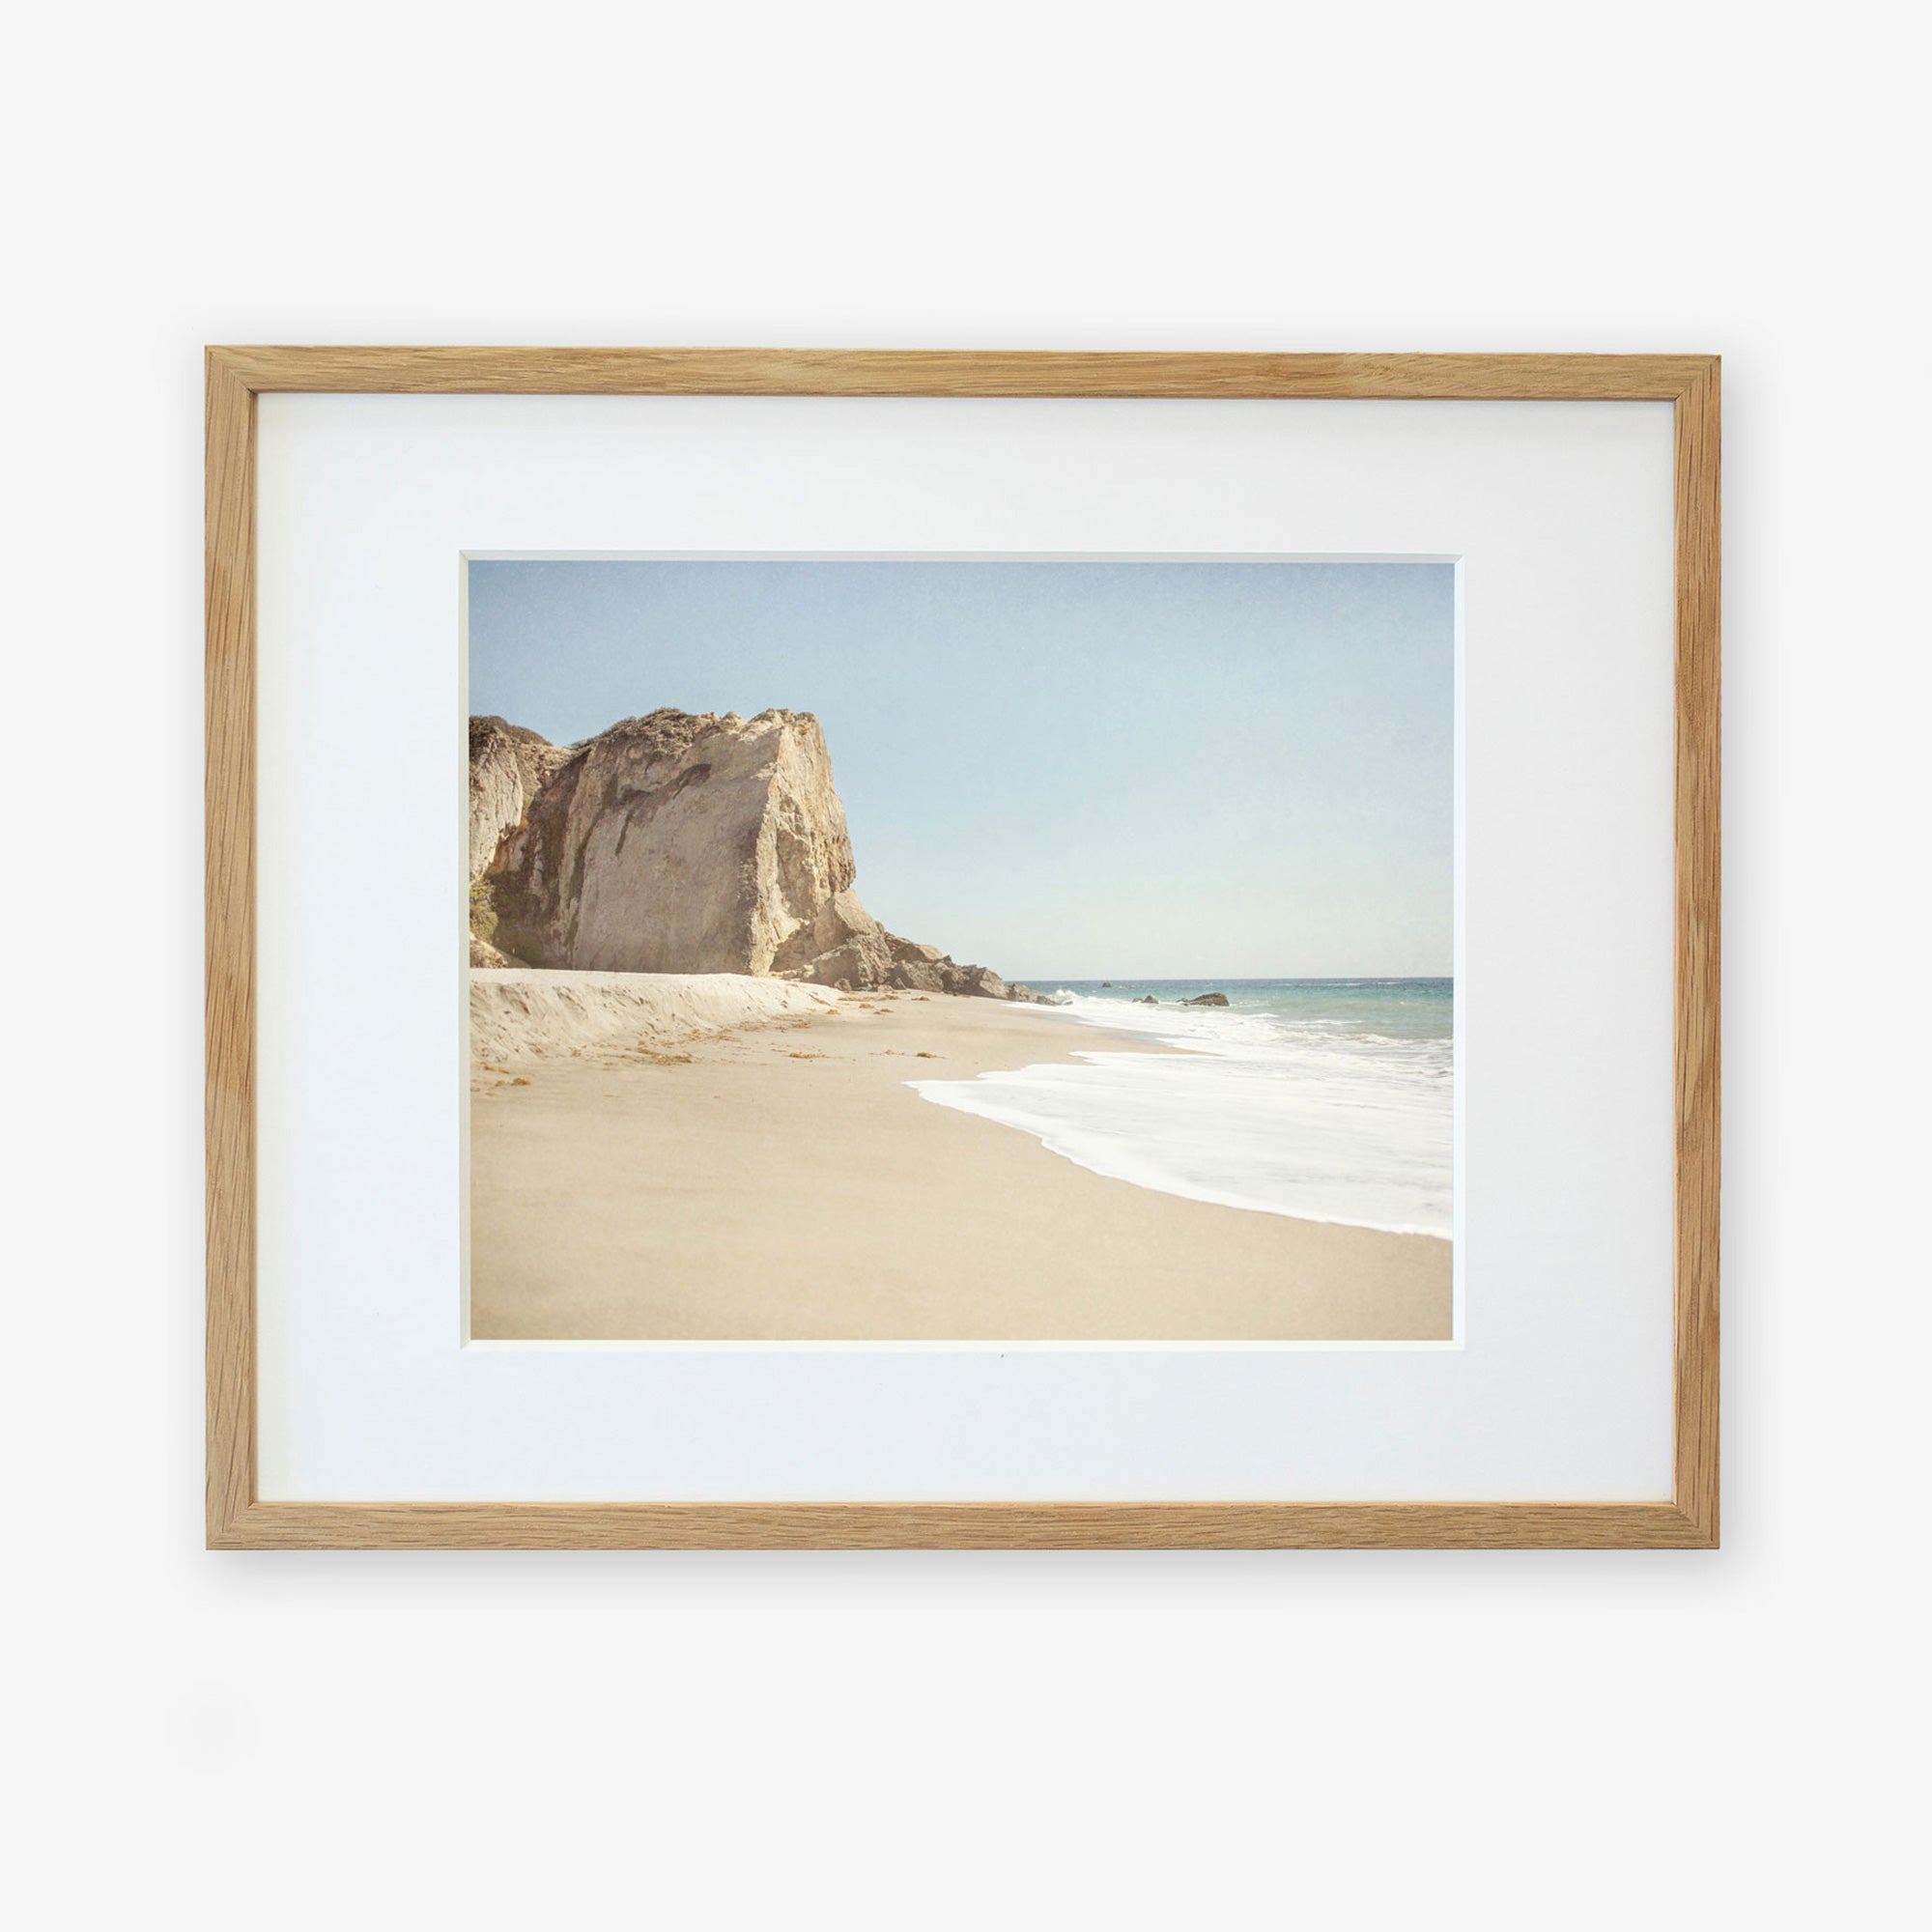 Offley Green&#39;s California Malibu Print, &#39;Point Dume&#39; depicts a serene beachscape featuring a sandy beach with gentle waves at Point Dume, flanked by a large, rugged cliff under a clear sky.